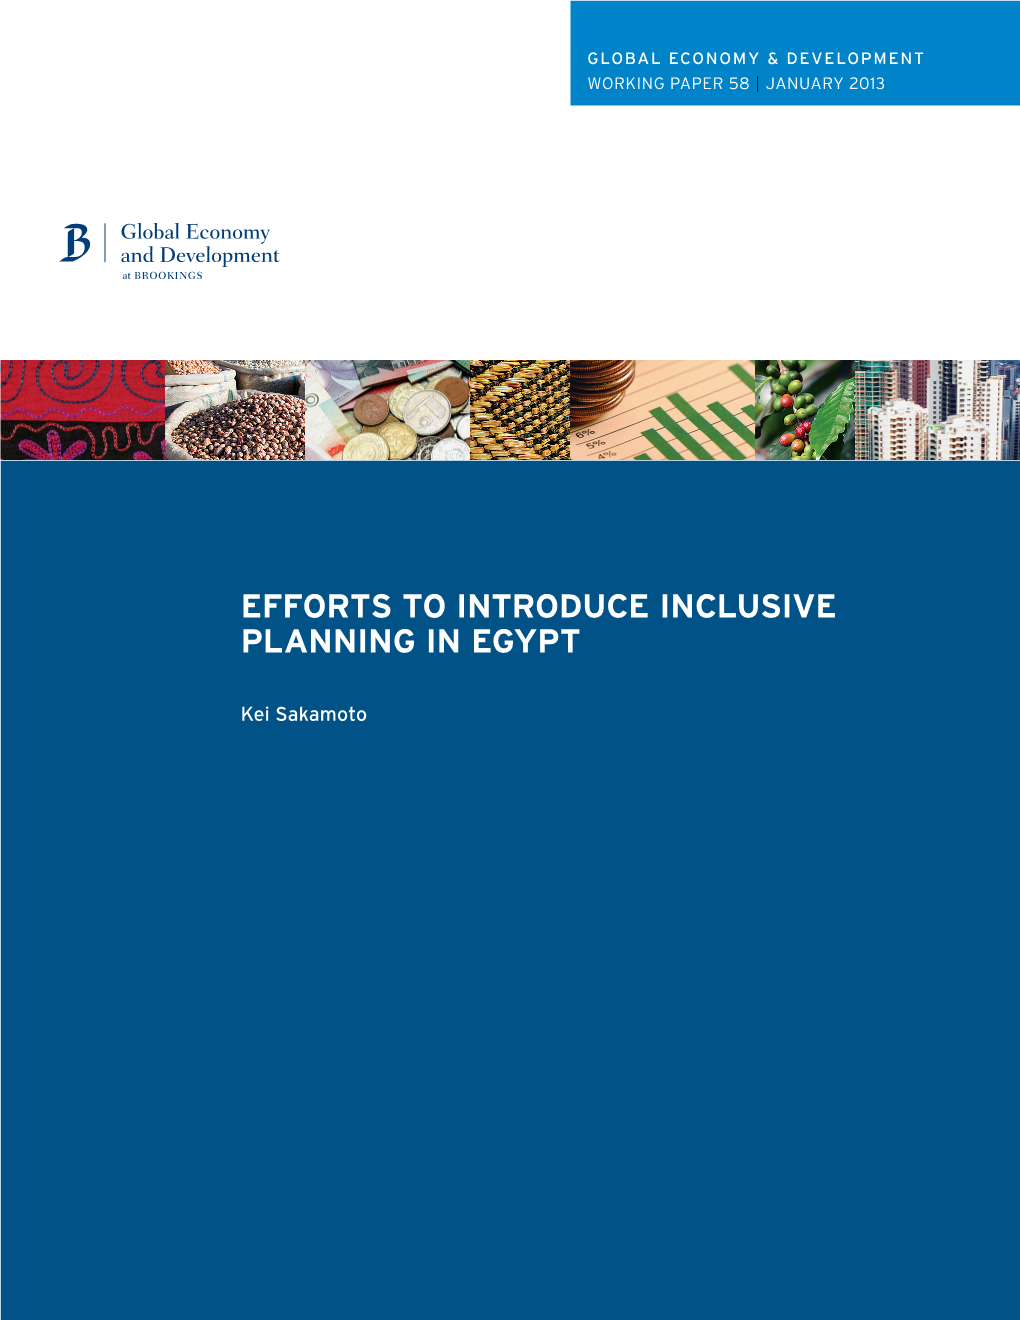 Efforts to Introduce Inclusive Planning in Egypt